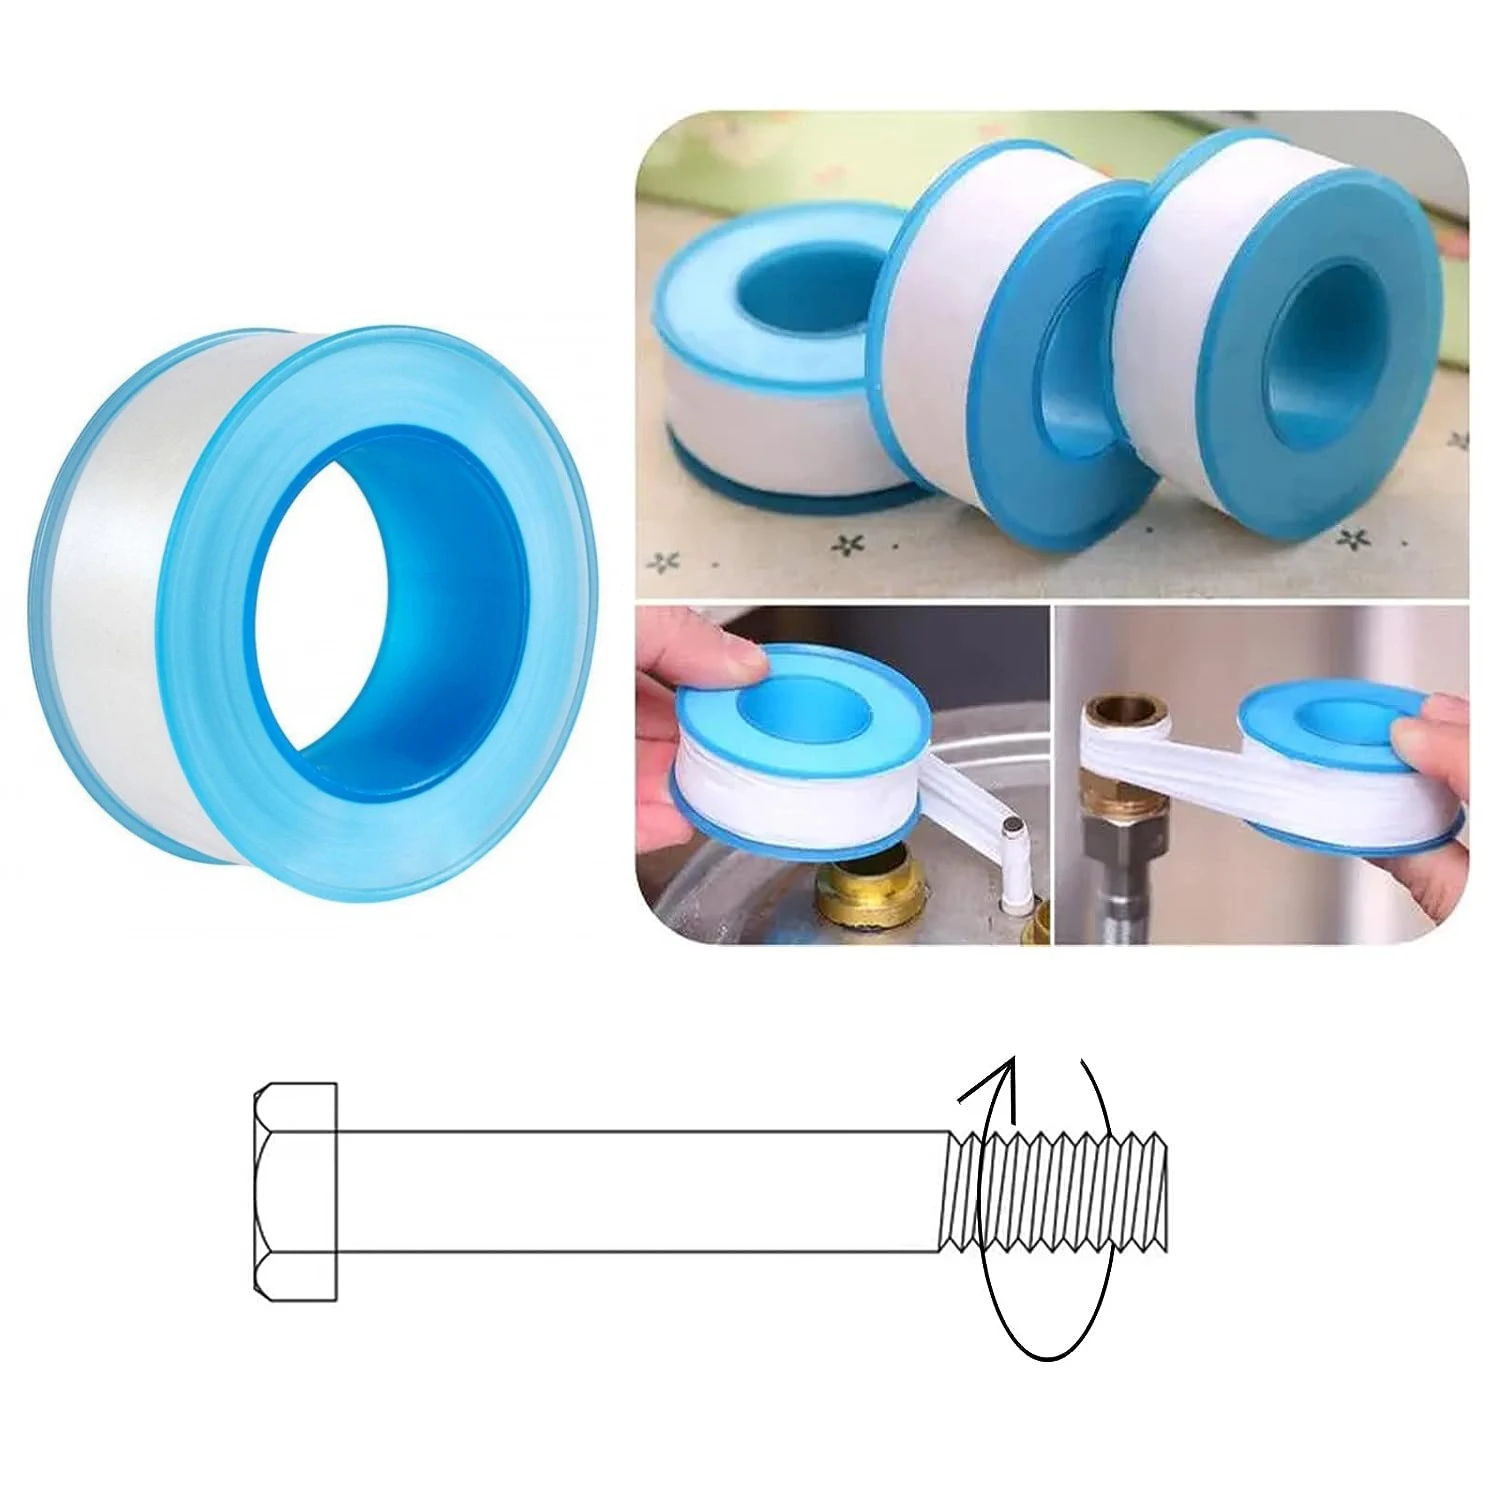 S2c696a4281ed40558c5fb7288df1b7b76 1-10 rolls of PTFE water pipe tape oil-free tape sealing tape pipe fittings thread sealing tape home improvement public pipe